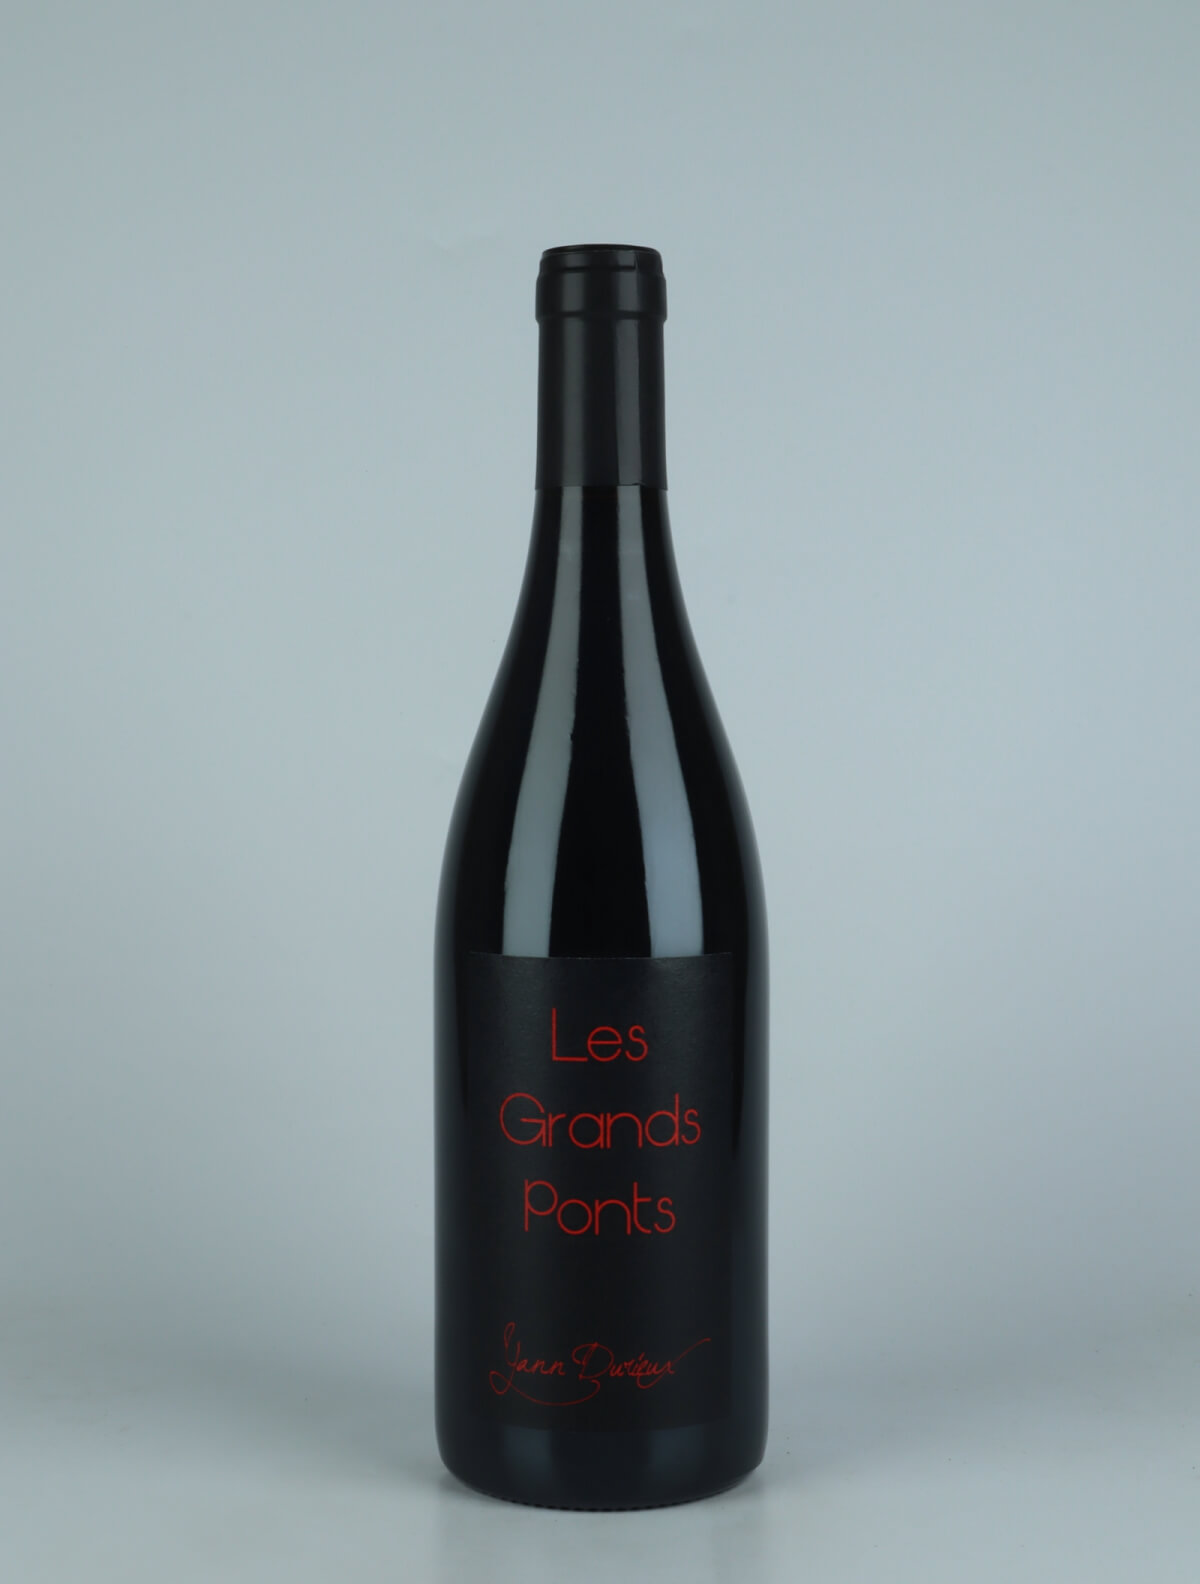 A bottle 2020 Les Grands Ponts Red wine from Yann Durieux, Burgundy in France